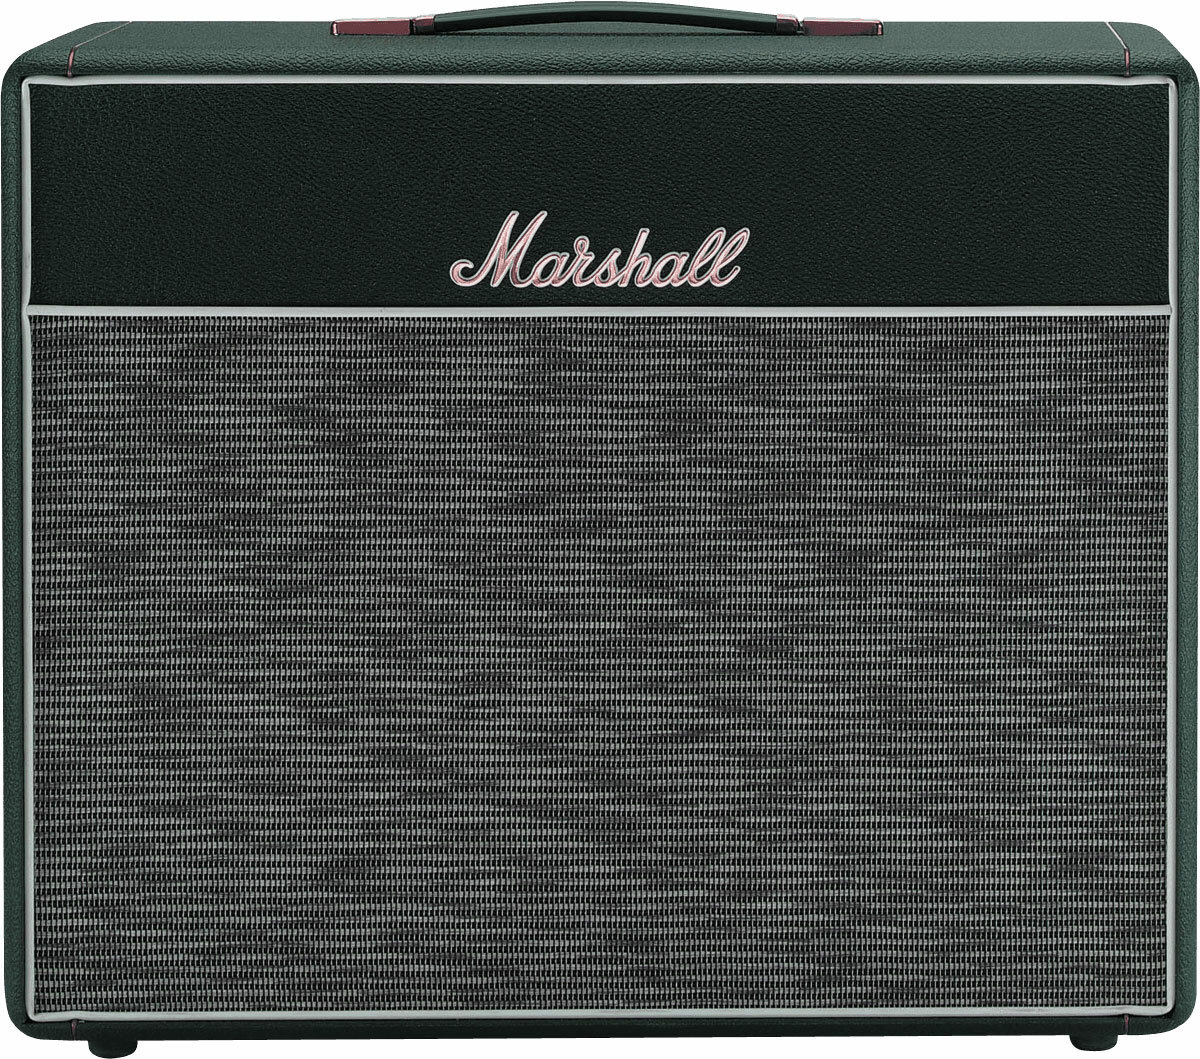 Marshall 1974cx Handwired Vintage Reissue 1x12 20w 16-ohms - Cabina amplificador para guitarra eléctrica - Main picture